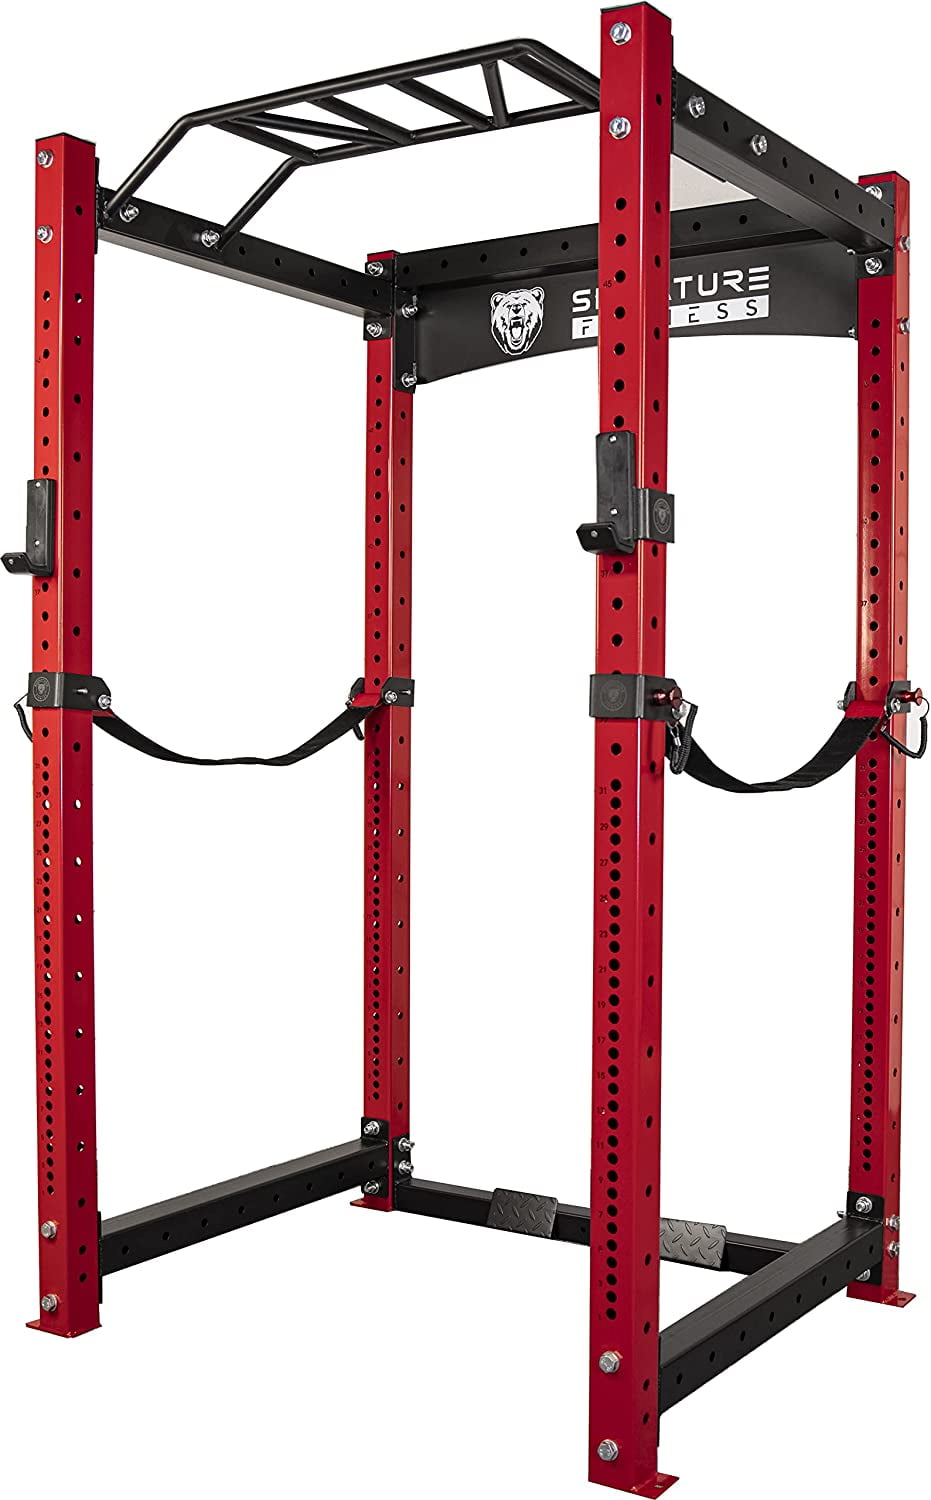 Other Optional Accessories Signature Fitness SF-3 1,500 Pound Capacity 3” x 3” Power Cage Squat Rack Black Includes J-Hooks and Safety Straps 